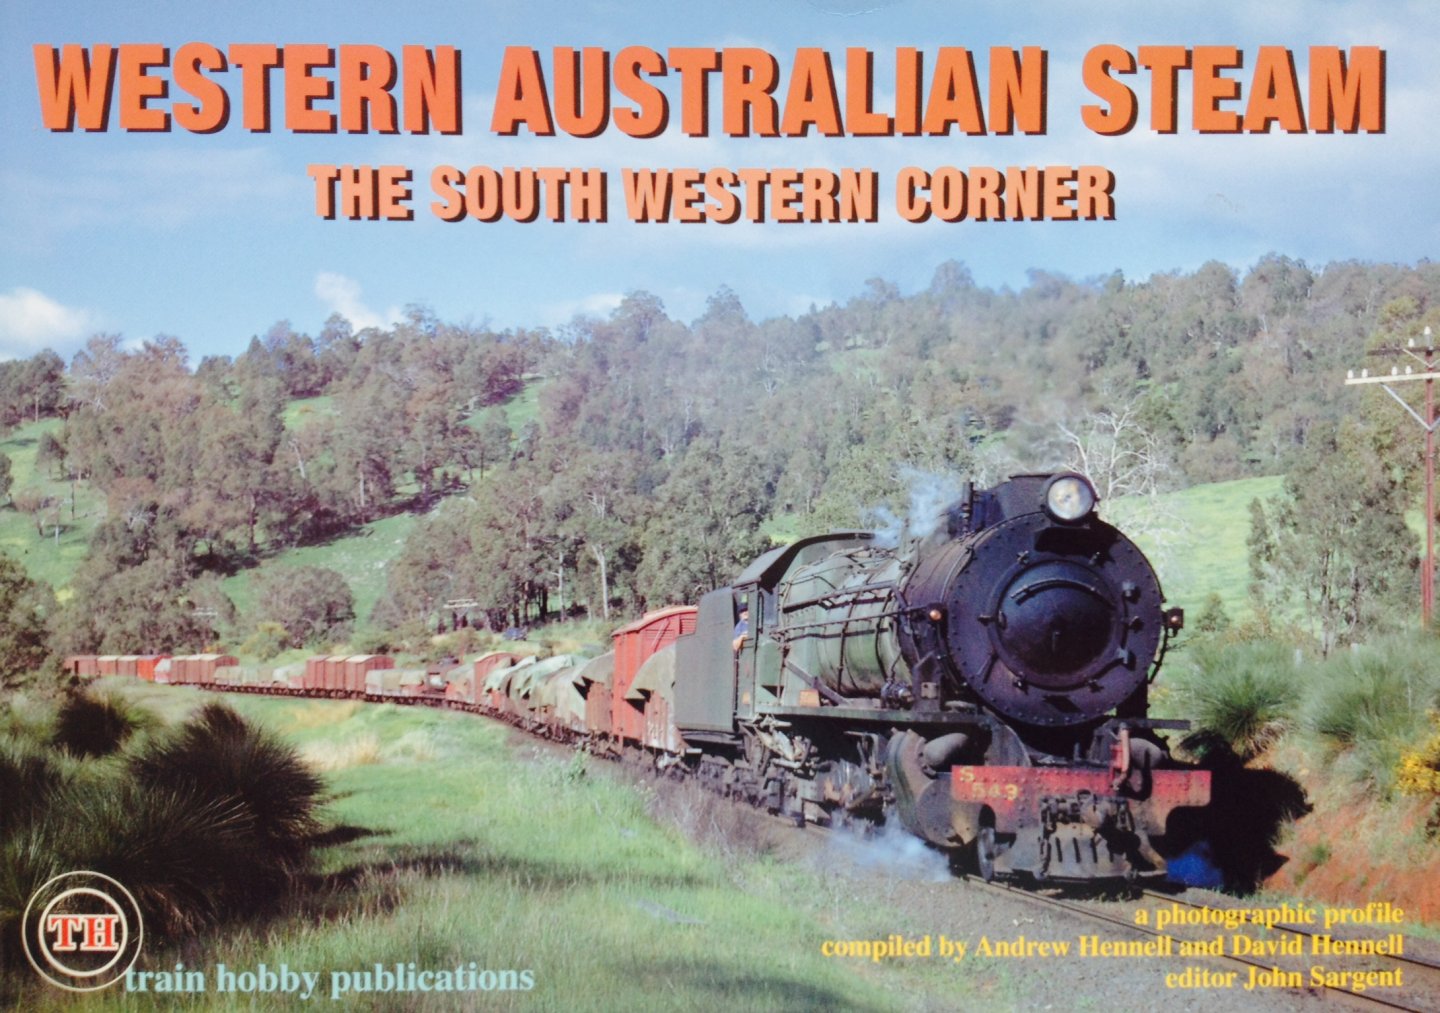 Hennell, Andrew.  Hennell, David. Sargent, John. - Western Australian Steam. The South Western Corner. A Photographic Profile.